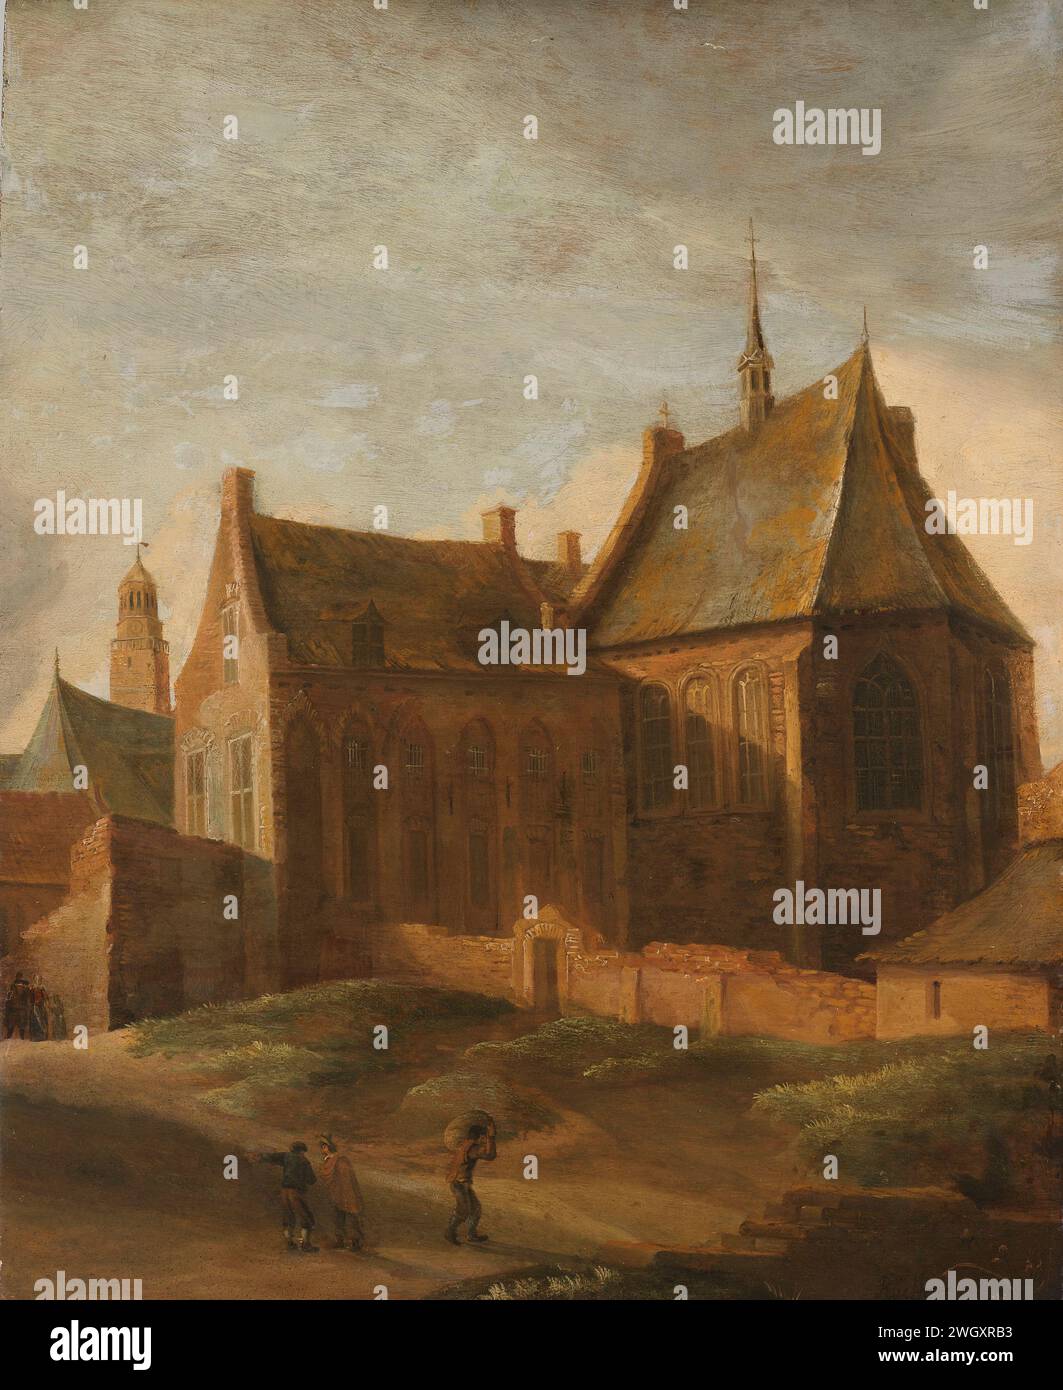 Convent of Saint Agnes in Utrecht, Pieter des Ruelles, 1650 - 1658 painting View of the Agnietenklooster in Utrecht, from outside the walls. In the foreground some figures.  panel. oil paint (paint)  church (exterior). abbey, monastery, convent  Roman Catholic church Agnietenklooster Stock Photo